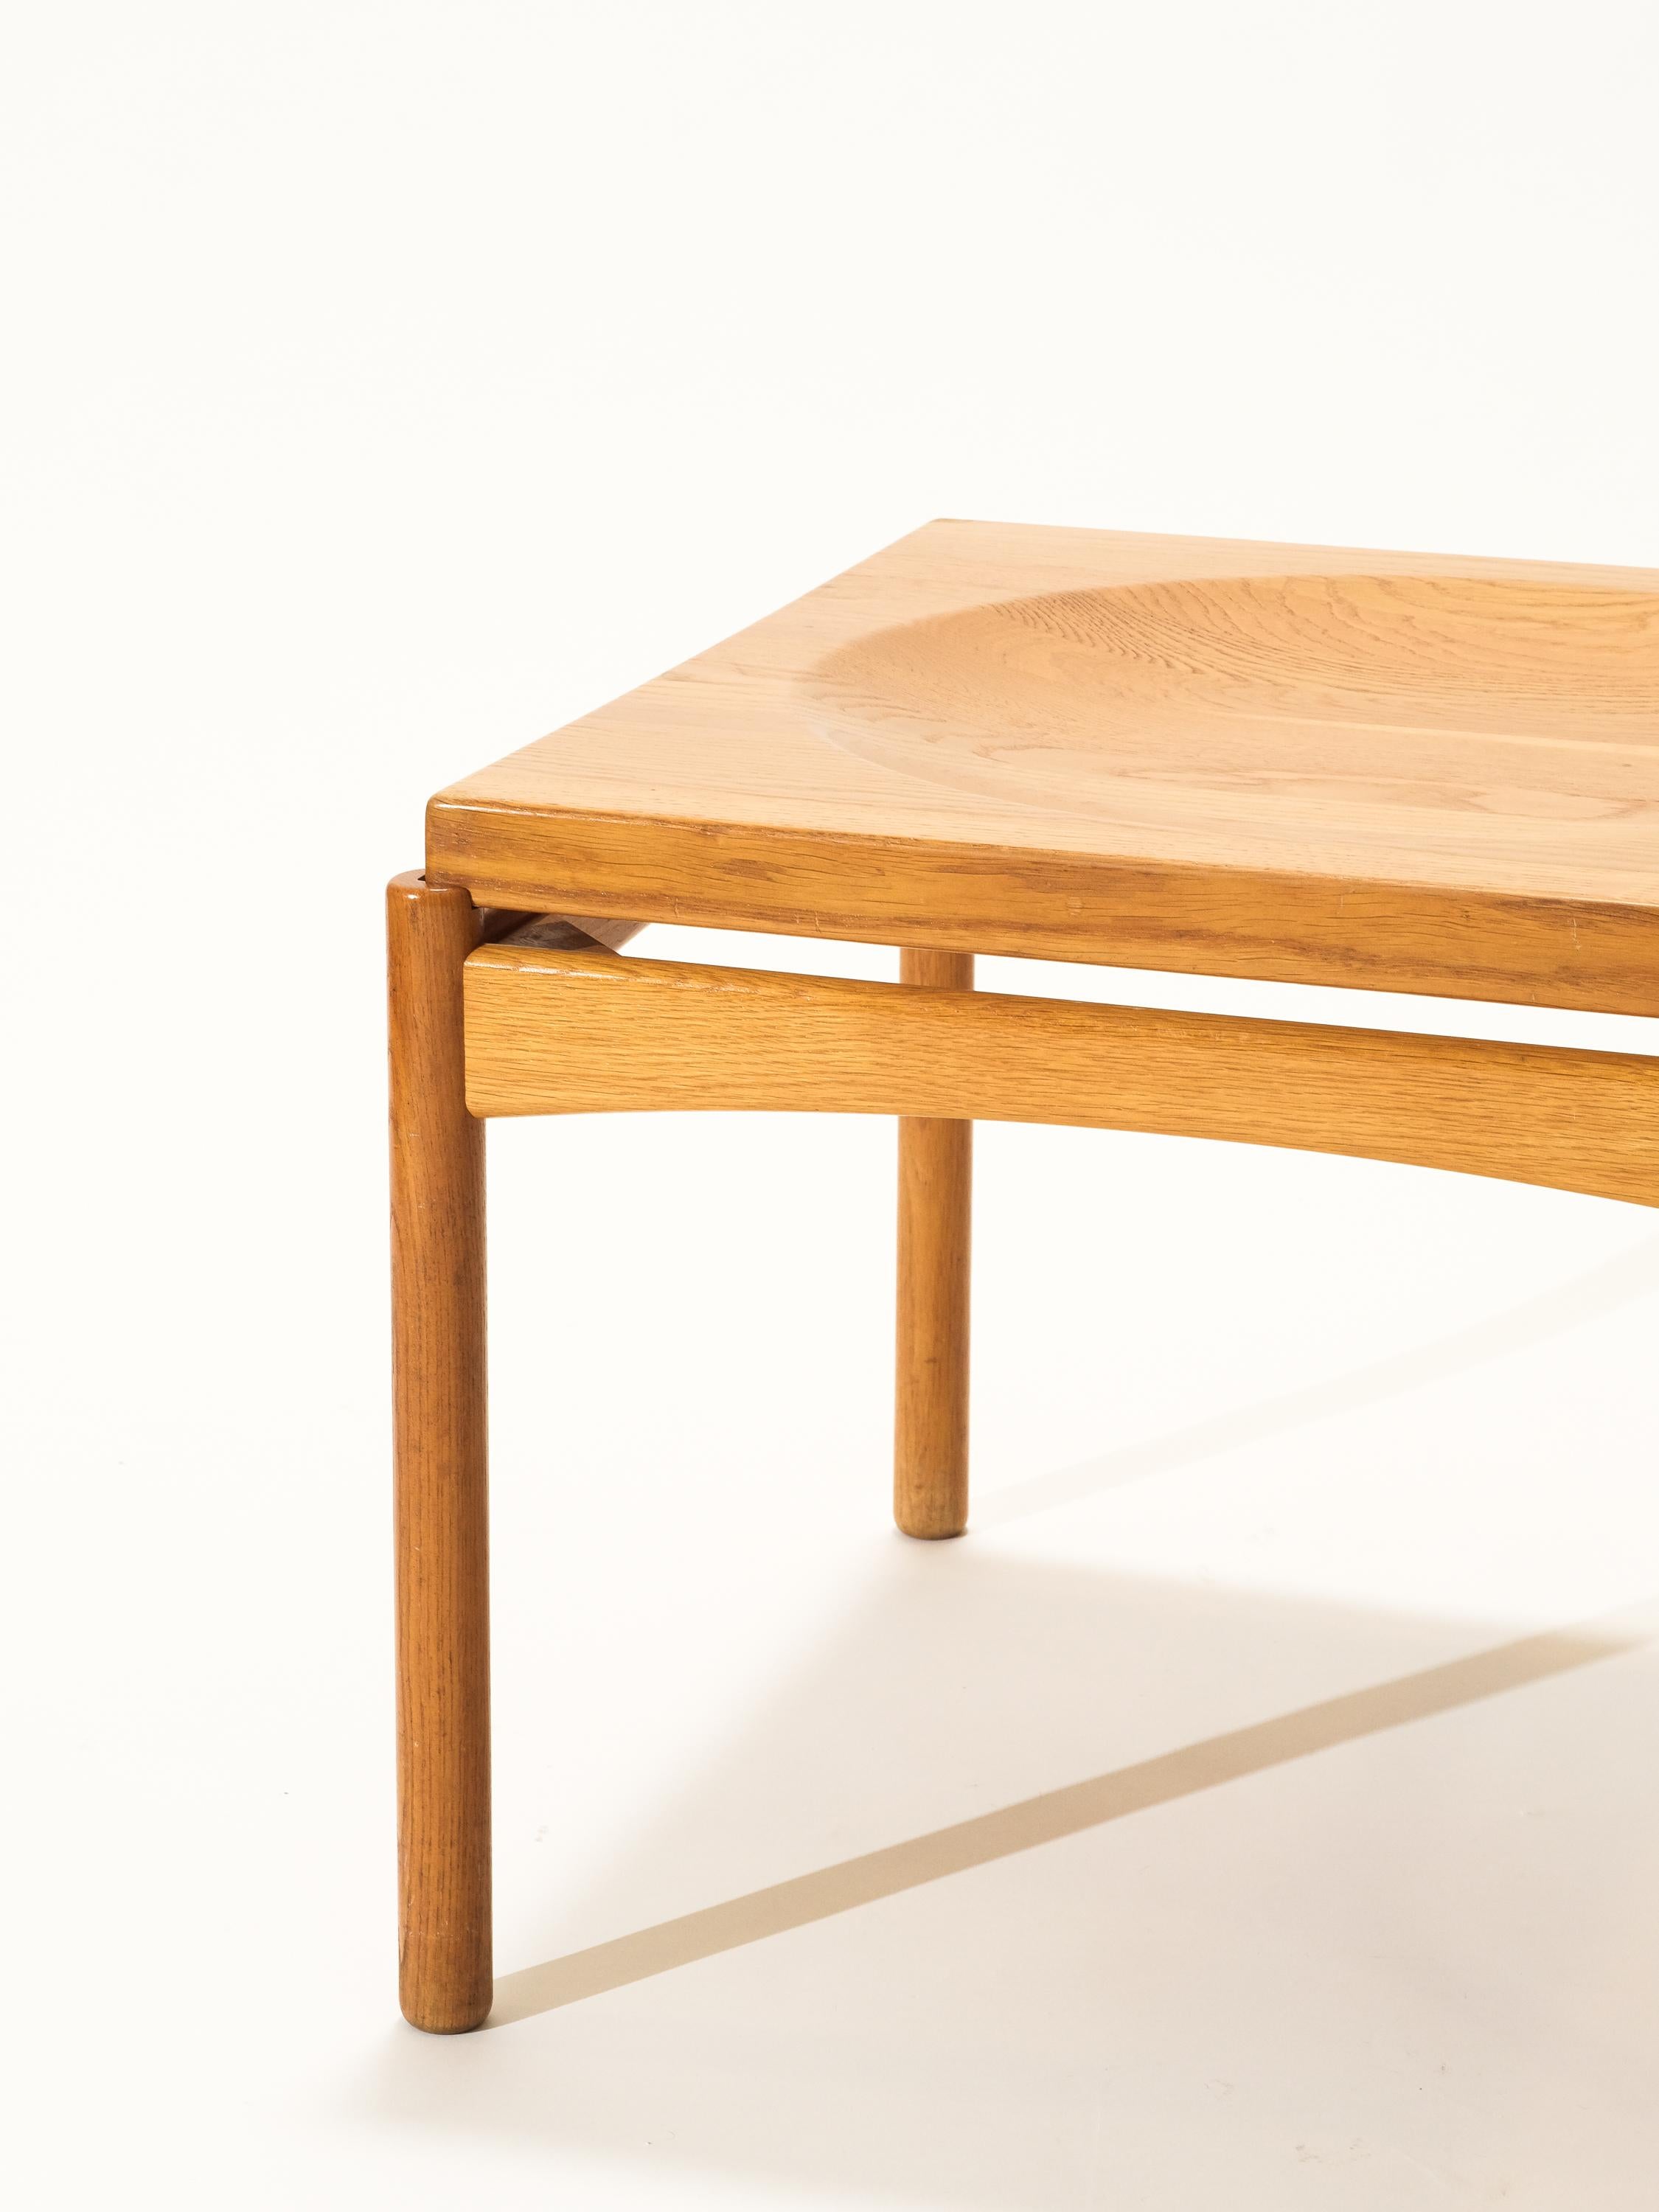 Swedish Solid Oak Coffee/Tray Table by Gunnar Myrstrand for Källemo, Sweden, 1960s For Sale